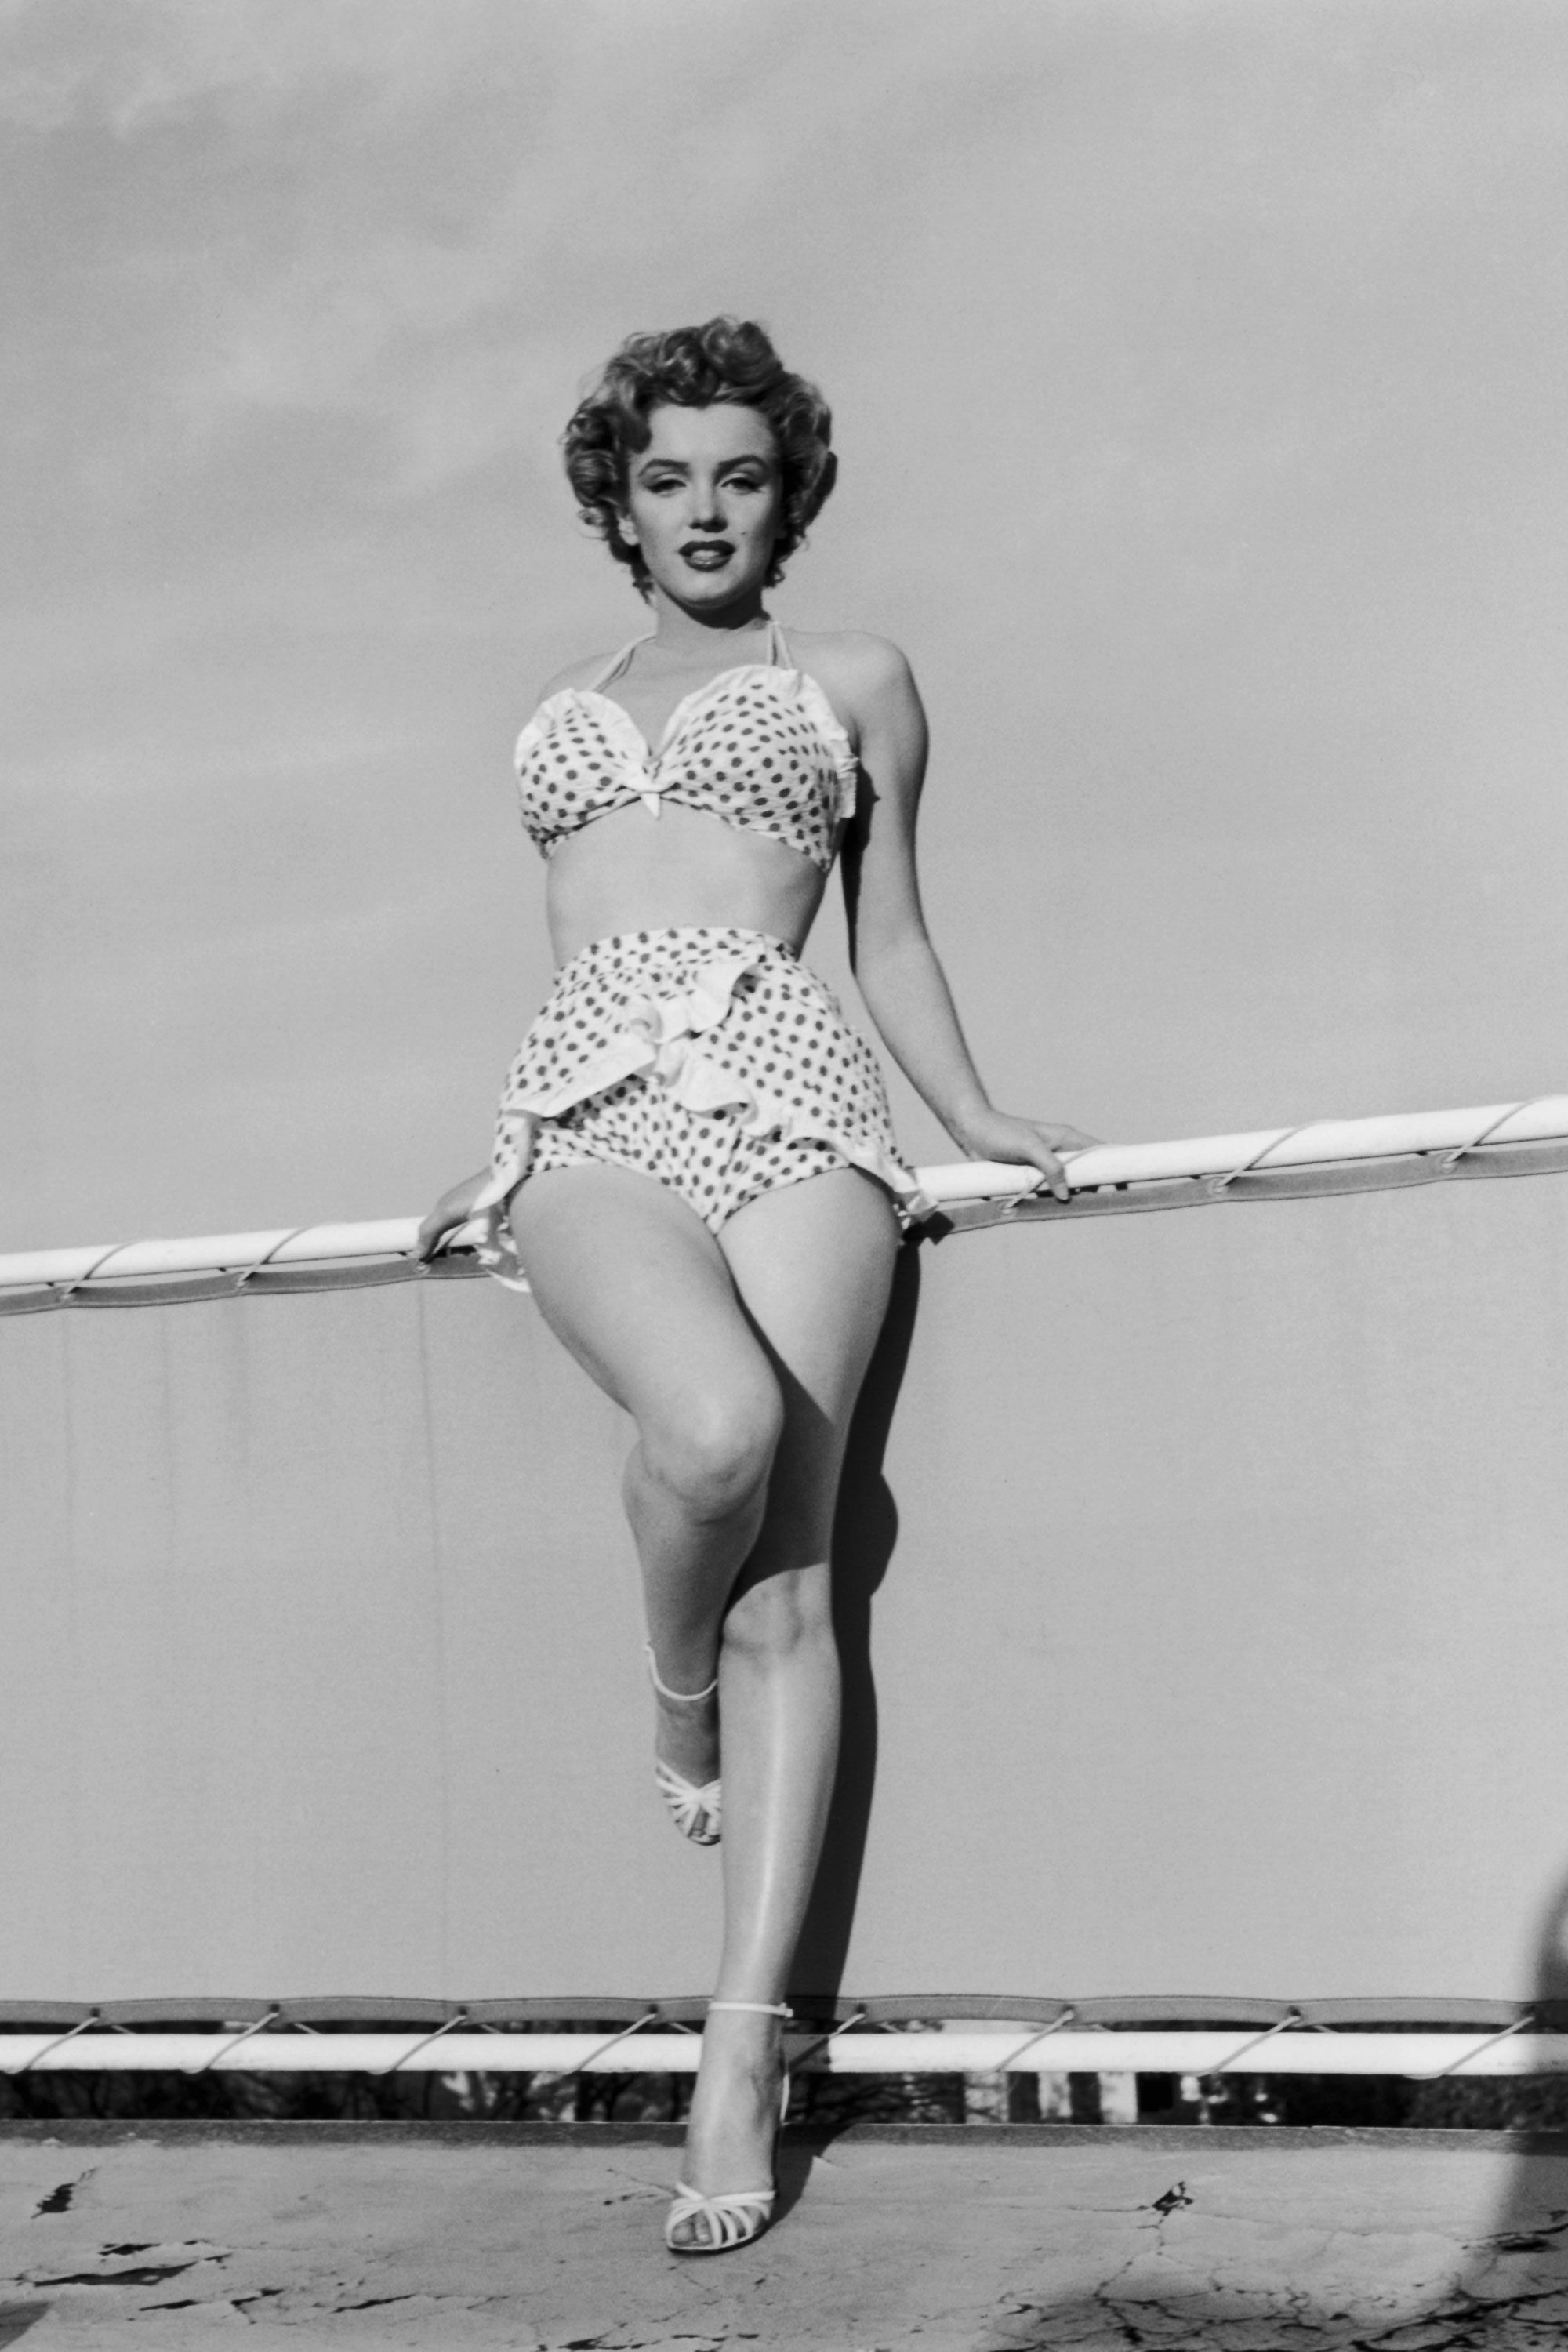 MG_MM051 : Marilyn Monroe - Iconic Images